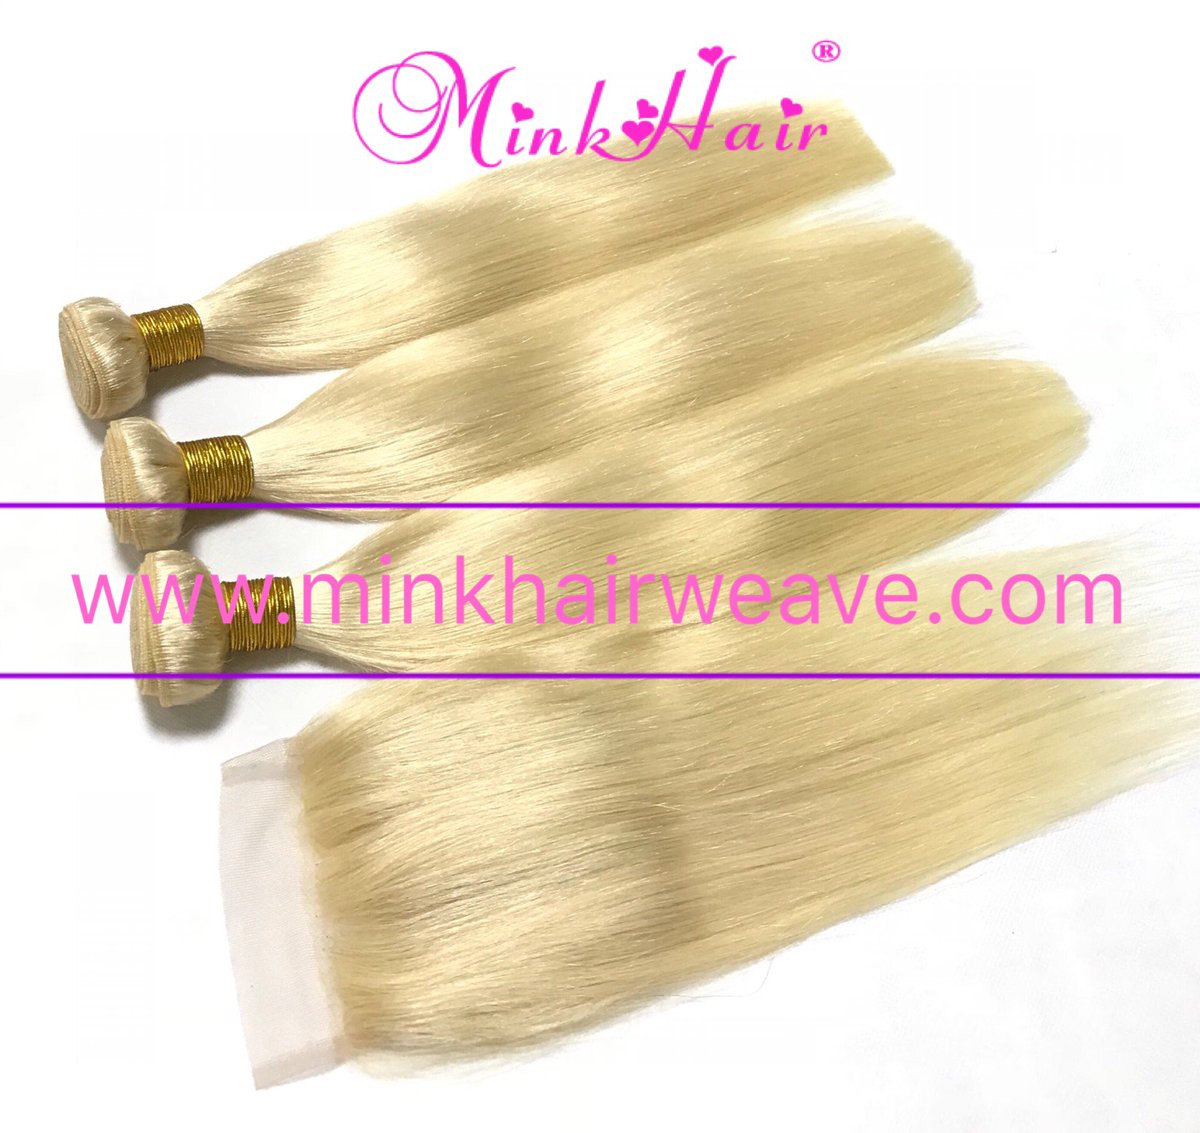 Wholesale 10A Grade Mink Hair, Shop: p: minkhair.com Ema Email: l: ken@minkhair.com #se #sewin #laceclosure #tampasewins #tampaextensions #tampamakeupartist #fullsewin #microlinks #okchairstylist #chicagohairstylist #lakelandhair  #tampafrontals #cardib